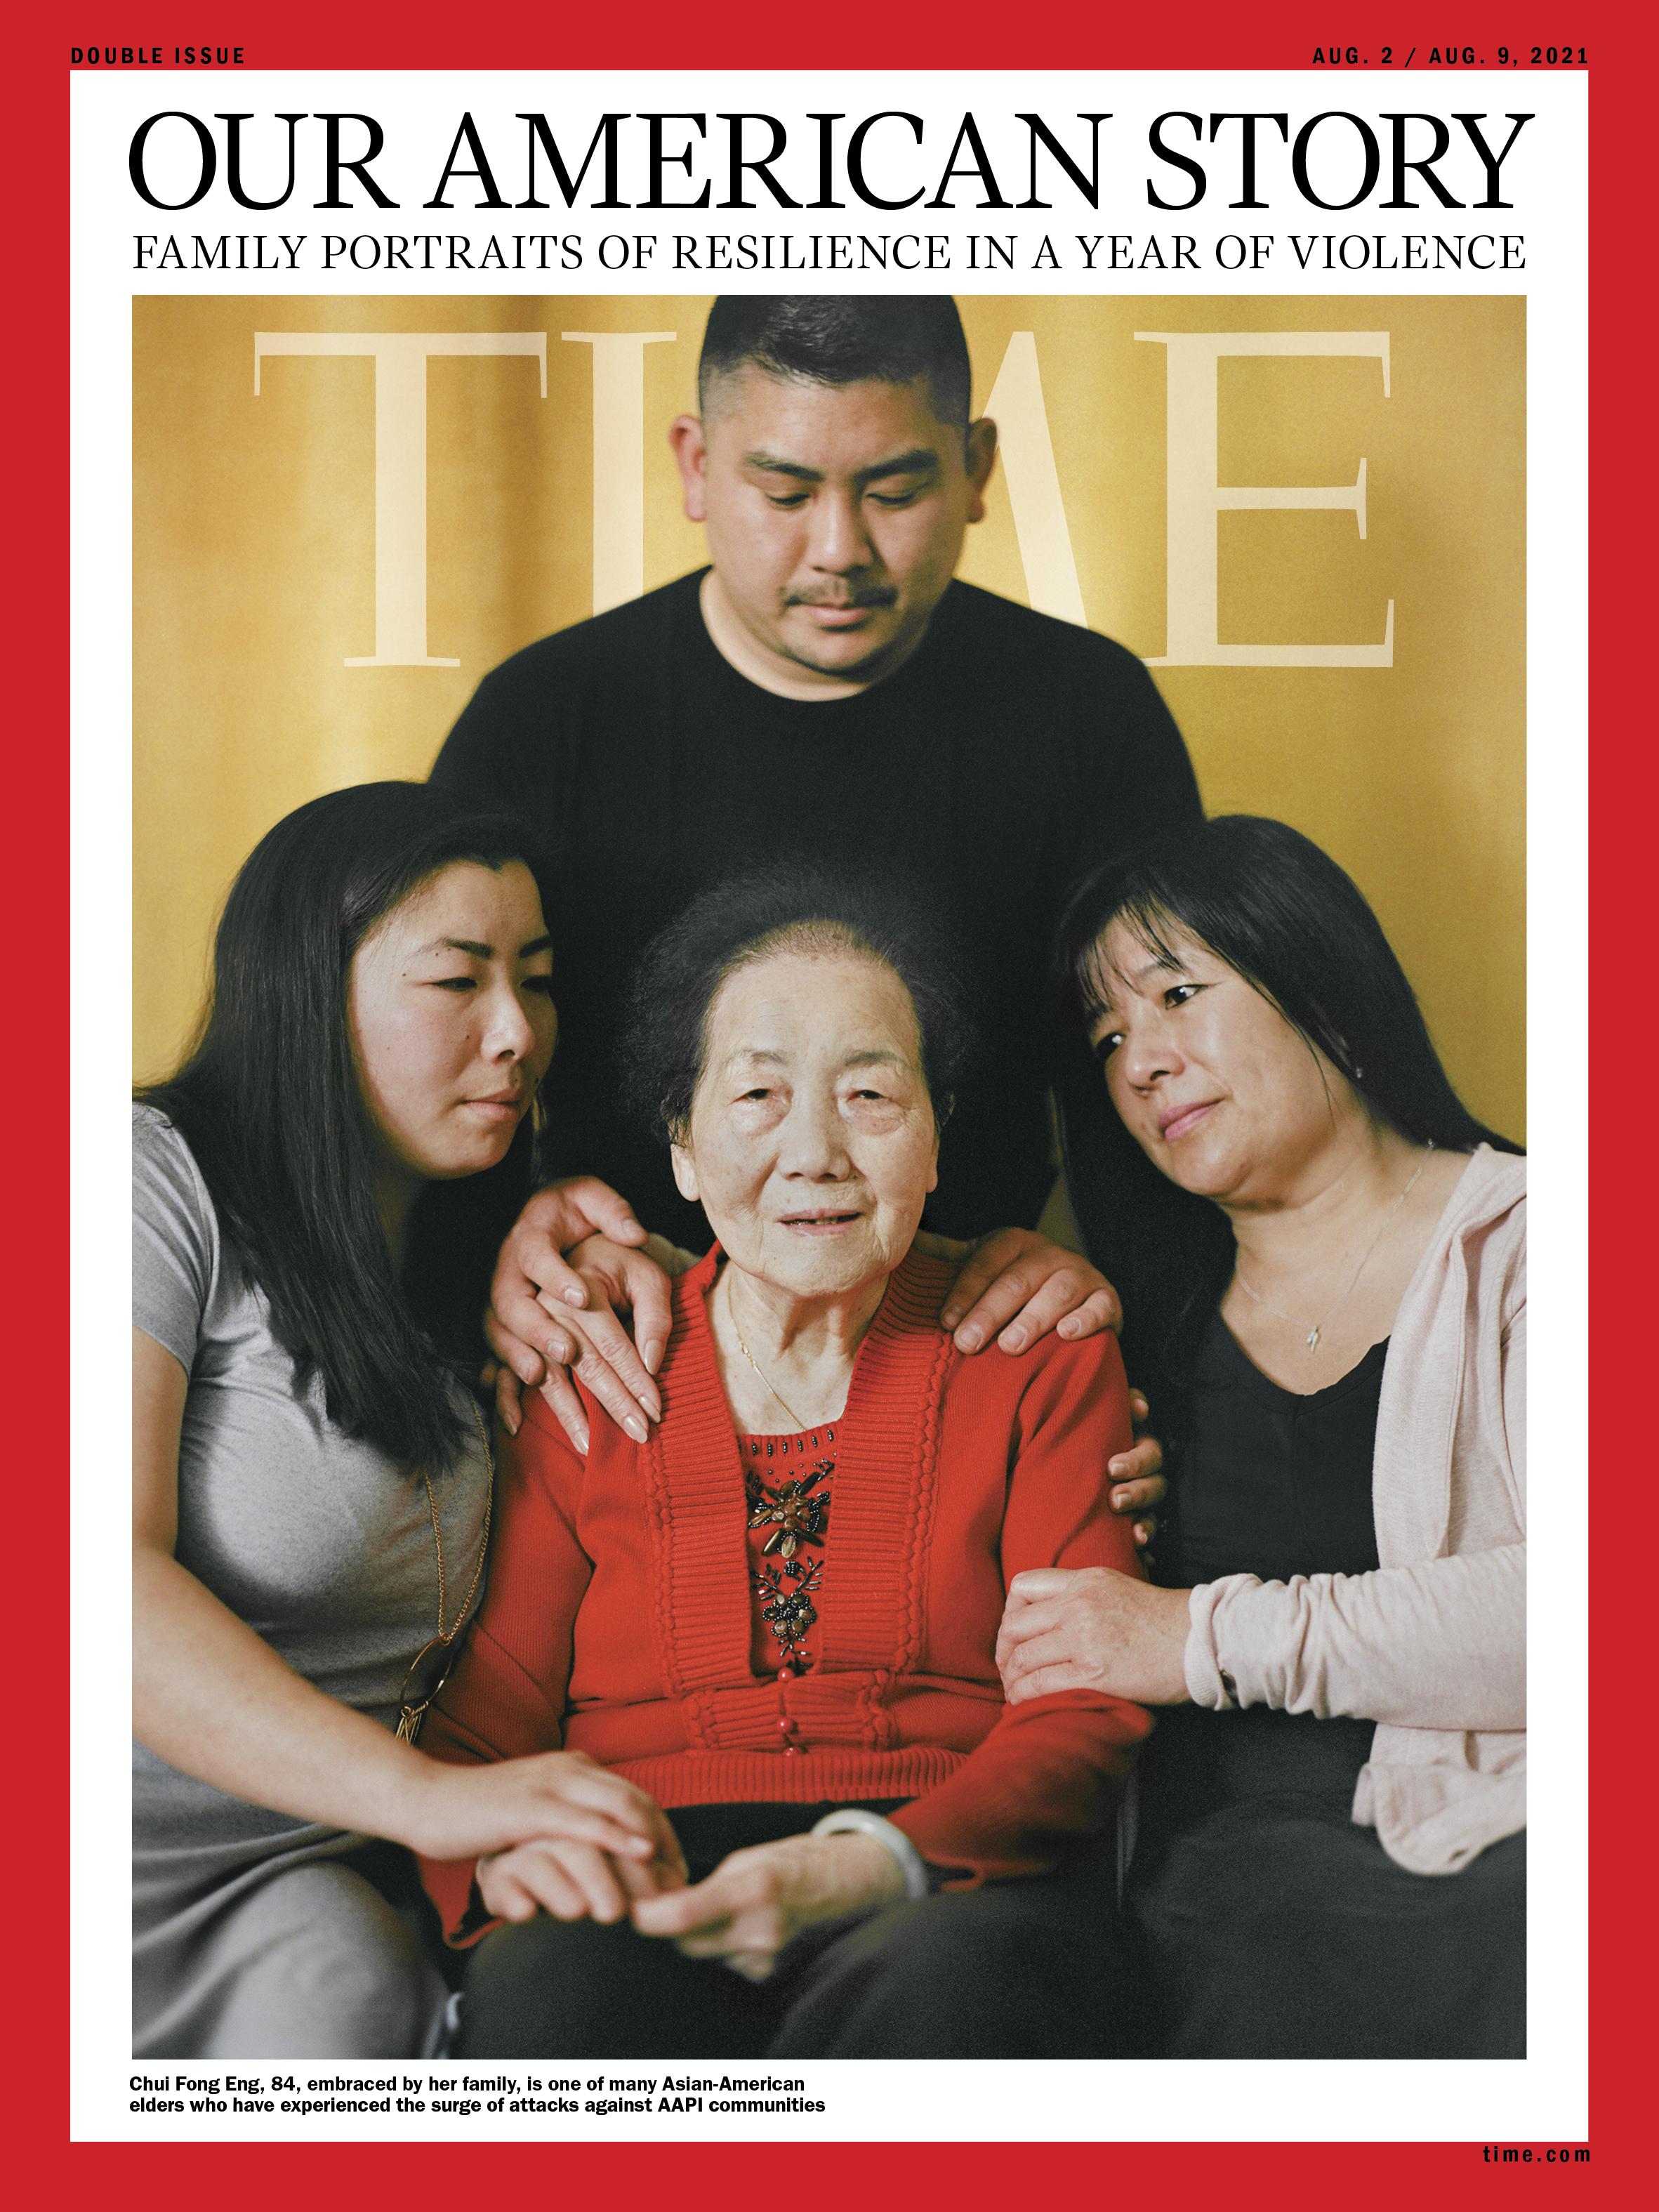 <strong>'I'M A FIGHTER.' </strong>Growing up in San Francisco, Victoria Eng, 28, left, and her brother Andrew Eng, 31, top, pictured on June 15 in Pacifica, Calif., learned that respecting their elders was part of their Chinese culture. And they had frequent chances to express that value, as their grandparents picked them up from school nearly every day and cared for them while their parents worked. “They fed us, they made sure that we were home safe, and they were a huge part of our lives from the start,” says Victoria. When violence against Asian-American elders rose drastically during the pandemic, Victoria was appalled—and when her own grandmother was attacked, she felt helpless. On May 4, shortly after Chui Fong Eng, center, received her COVID-19 vaccination, the 84-year-old ventured into Chinatown for the first time in over a year to buy groceries. While waiting at a bus stop, she was stabbed through her right arm with a large blade that then entered her chest and punctured a lung. Another Asian-American senior at the bus stop was also stabbed. The Engs clung to one another as their matriarch underwent surgery. “I cried, and I cried, and I cried,” says Chui Fong’s daughter-in-law Linda Lim, right. “I couldn’t believe that she survived this.” Less surprised was Chui Fong, who, as the eldest of her seven siblings, has always been tough. After arriving in the U.S. from Hong Kong in 1963, she sewed clothes in a factory until she was able to sponsor her parents and siblings. “I’m a fighter,” she says. Linda, 56, says the attack brought the family closer, after years of distance following her divorce from Victoria and Andrew’s father. “It made us realize how important family is,” she says. (Photograph by Emanuel Hahn for TIME)